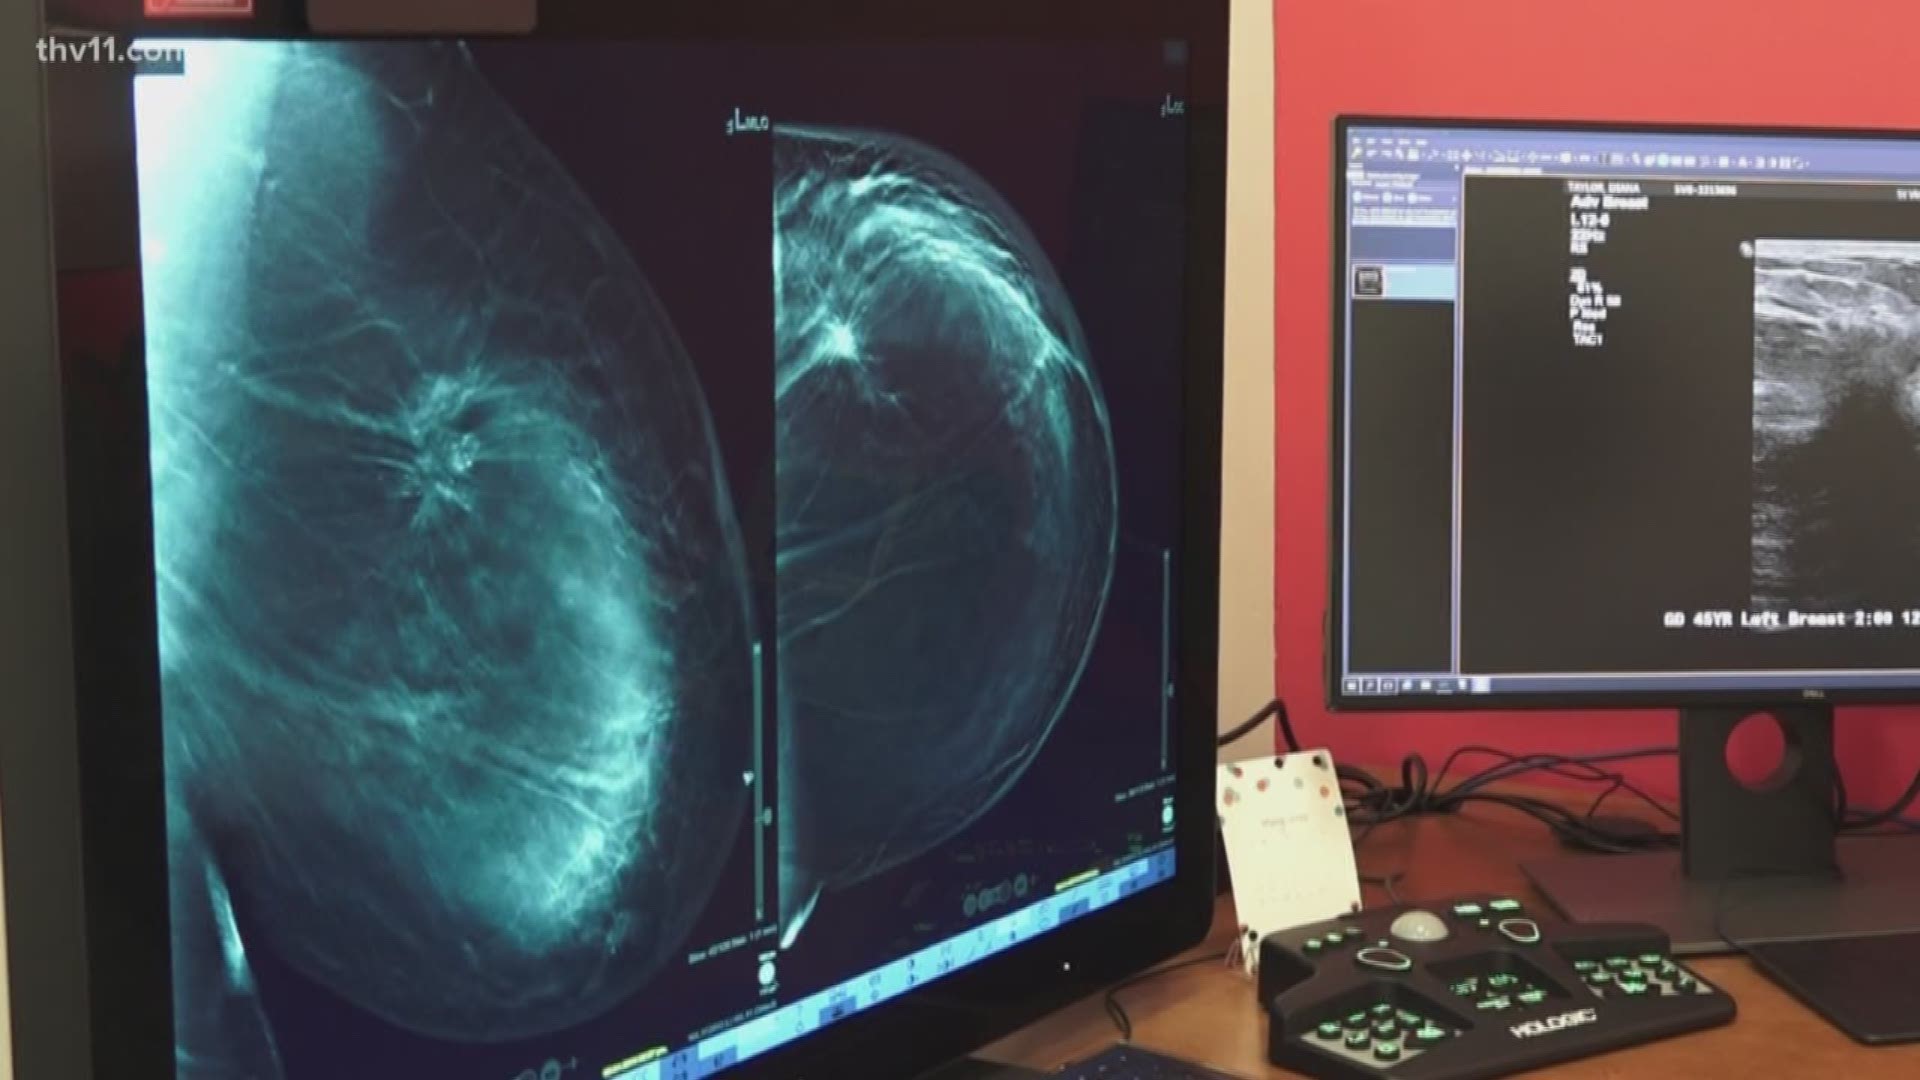 A new breast center opening in Little Rock's CARTI cancer cancer is hoping to make a major difference for women in the state even helping to save more lives through advanced technology and early diagnostics.